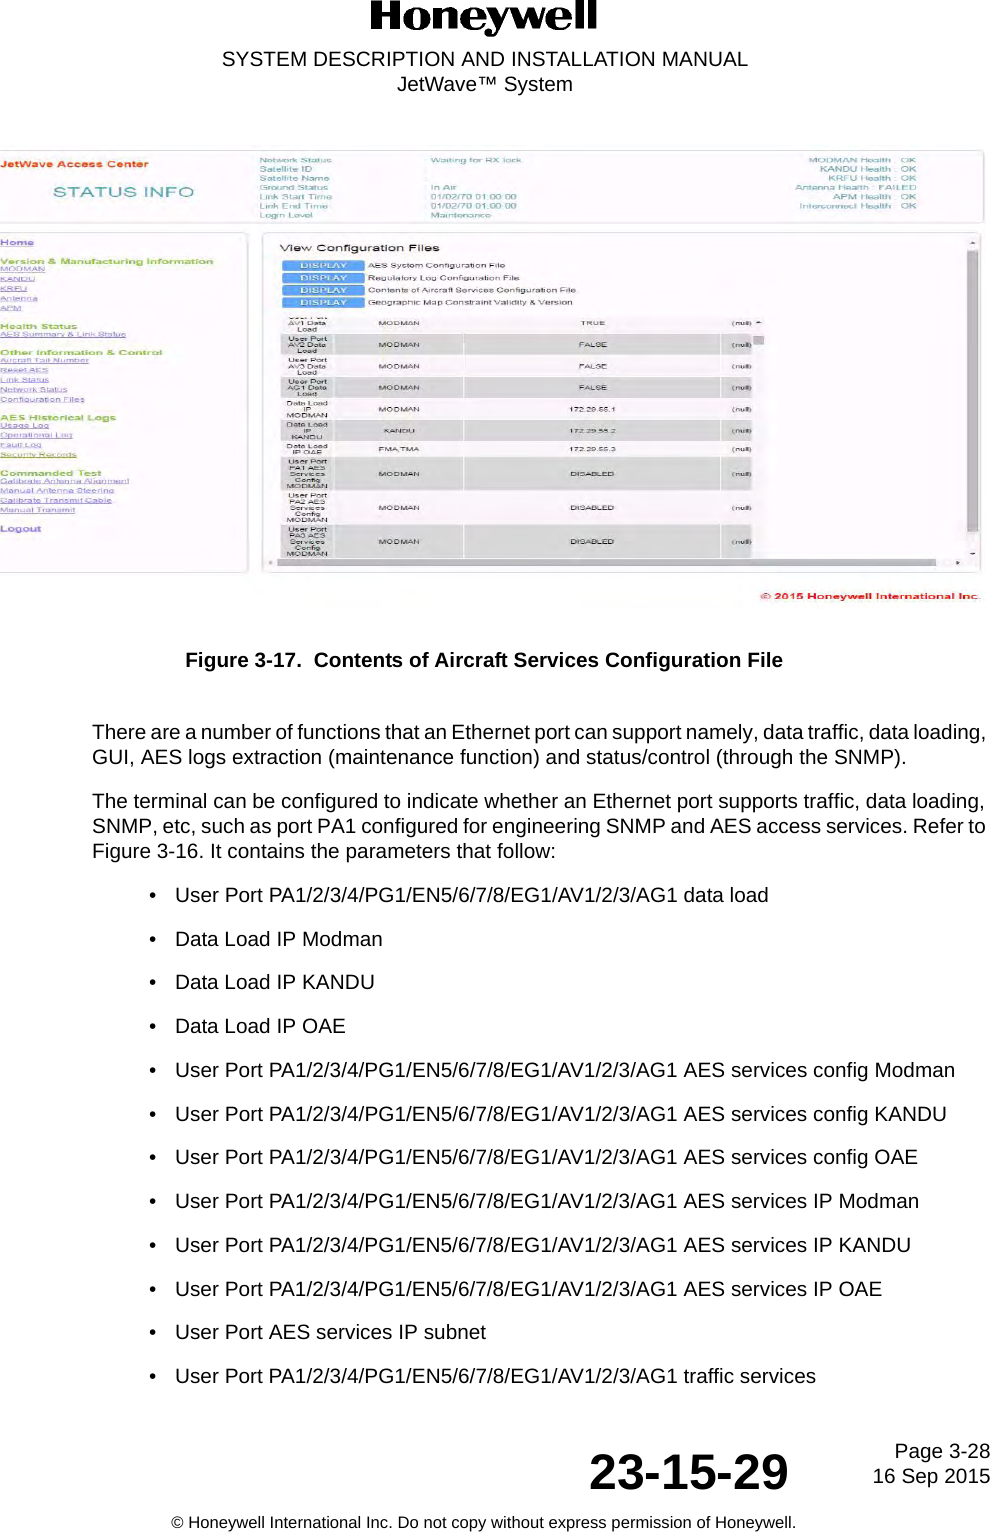 Page 3-2816 Sep 201523-15-29SYSTEM DESCRIPTION AND INSTALLATION MANUALJetWave™ System© Honeywell International Inc. Do not copy without express permission of Honeywell.Figure 3-17.  Contents of Aircraft Services Configuration FileThere are a number of functions that an Ethernet port can support namely, data traffic, data loading, GUI, AES logs extraction (maintenance function) and status/control (through the SNMP). The terminal can be configured to indicate whether an Ethernet port supports traffic, data loading, SNMP, etc, such as port PA1 configured for engineering SNMP and AES access services. Refer to Figure 3-16. It contains the parameters that follow:• User Port PA1/2/3/4/PG1/EN5/6/7/8/EG1/AV1/2/3/AG1 data load• Data Load IP Modman• Data Load IP KANDU• Data Load IP OAE• User Port PA1/2/3/4/PG1/EN5/6/7/8/EG1/AV1/2/3/AG1 AES services config Modman• User Port PA1/2/3/4/PG1/EN5/6/7/8/EG1/AV1/2/3/AG1 AES services config KANDU• User Port PA1/2/3/4/PG1/EN5/6/7/8/EG1/AV1/2/3/AG1 AES services config OAE• User Port PA1/2/3/4/PG1/EN5/6/7/8/EG1/AV1/2/3/AG1 AES services IP Modman• User Port PA1/2/3/4/PG1/EN5/6/7/8/EG1/AV1/2/3/AG1 AES services IP KANDU• User Port PA1/2/3/4/PG1/EN5/6/7/8/EG1/AV1/2/3/AG1 AES services IP OAE• User Port AES services IP subnet• User Port PA1/2/3/4/PG1/EN5/6/7/8/EG1/AV1/2/3/AG1 traffic services